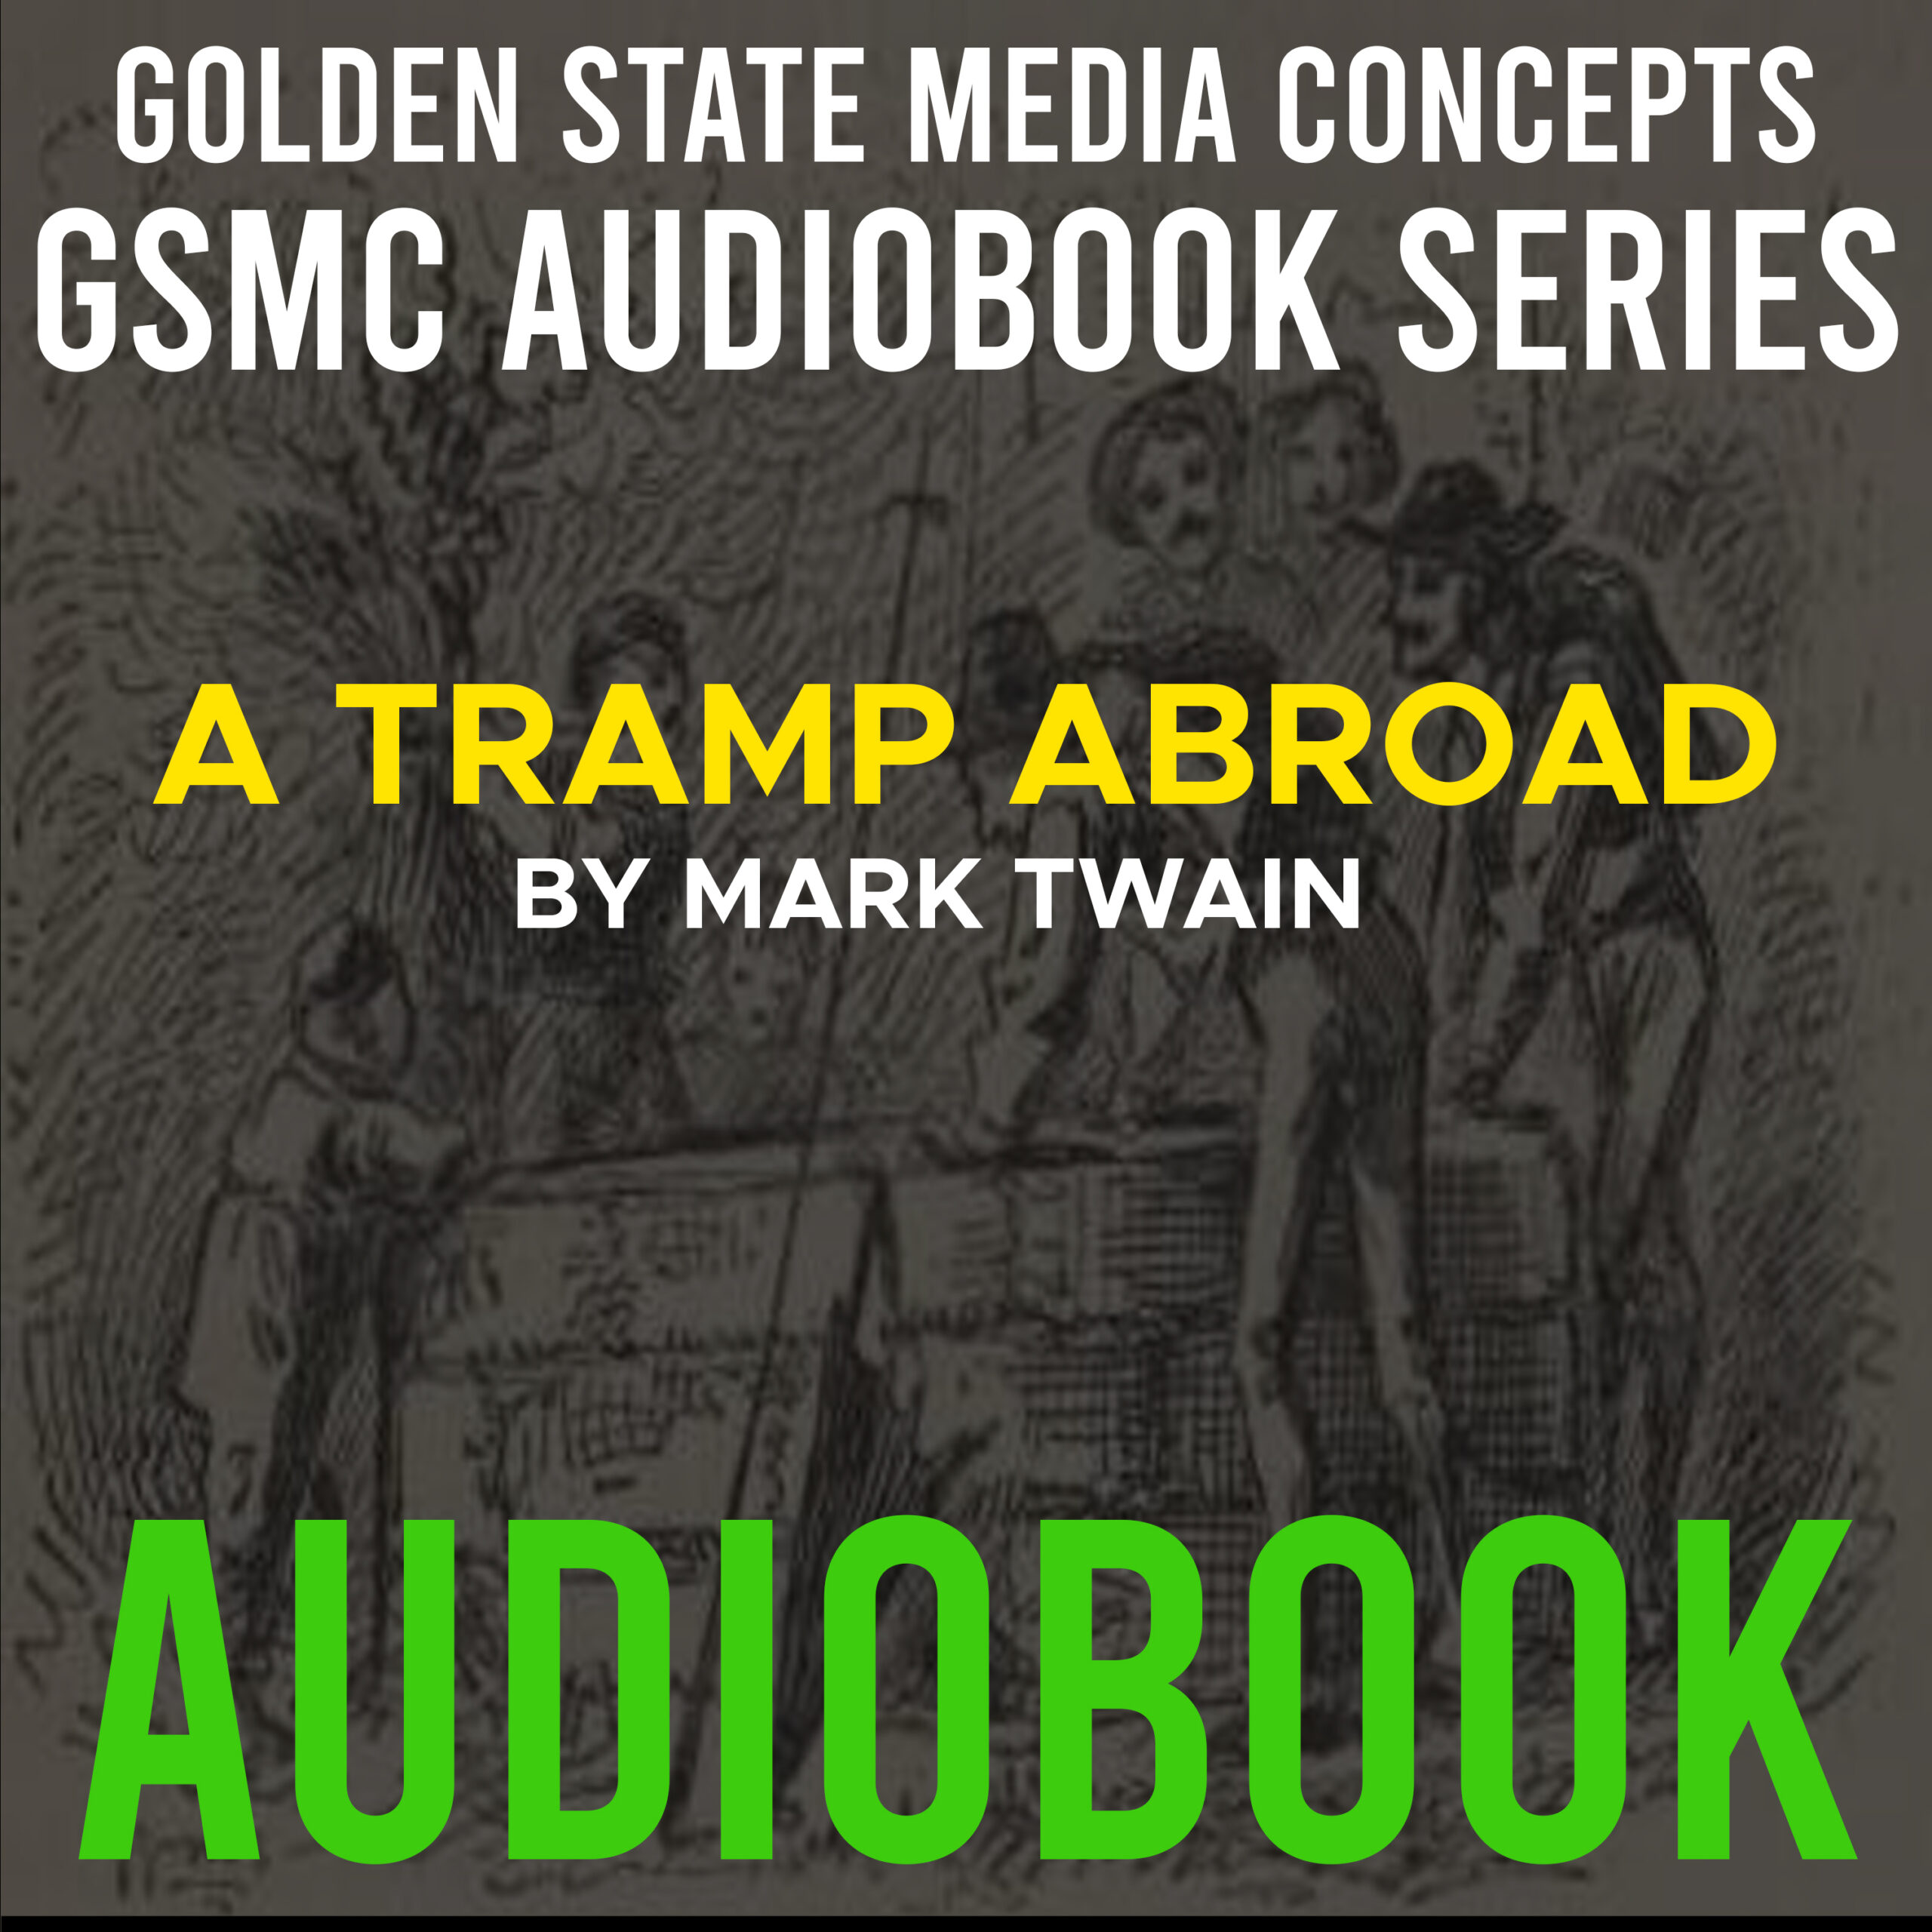 GSMC Audiobook Series: A Tramp Abroad by Mark Twain